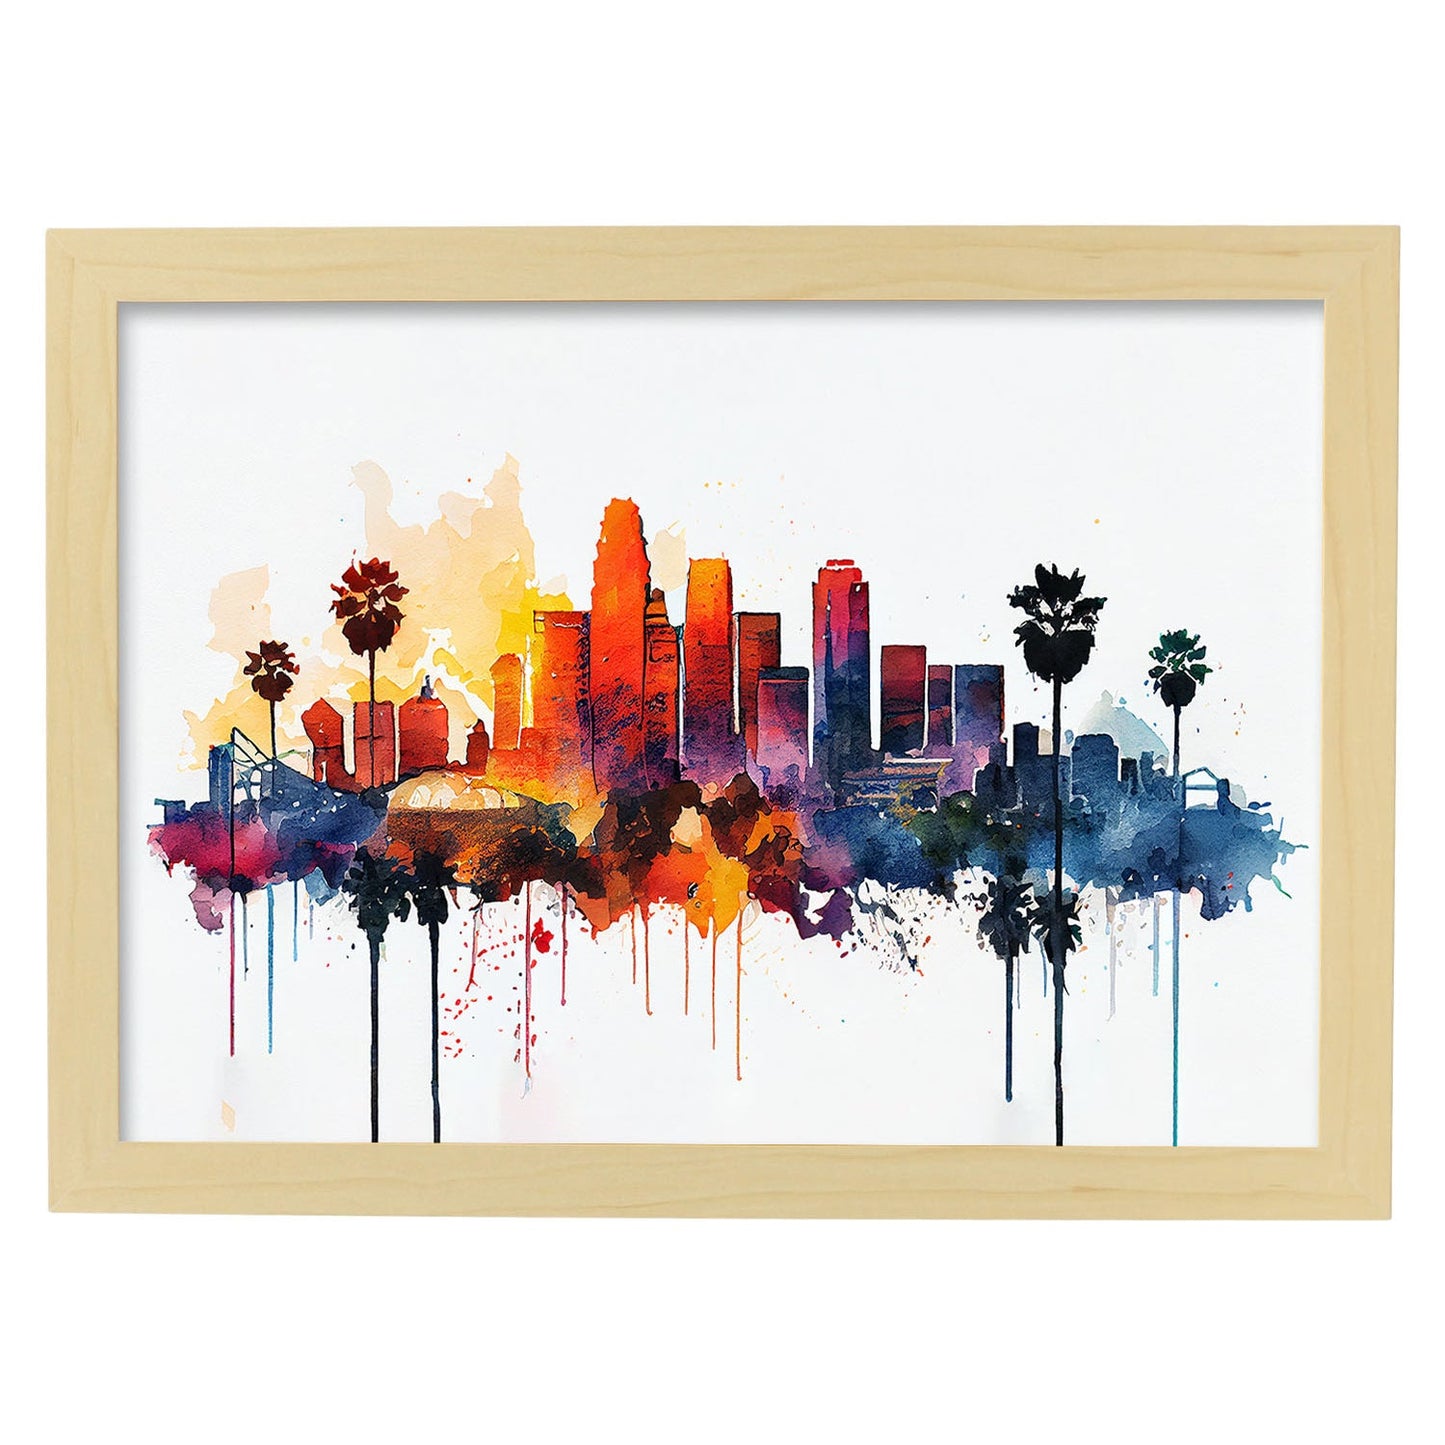 Nacnic watercolor of a skyline of the city of Los Angeles_4. Aesthetic Wall Art Prints for Bedroom or Living Room Design.-Artwork-Nacnic-A4-Marco Madera Clara-Nacnic Estudio SL